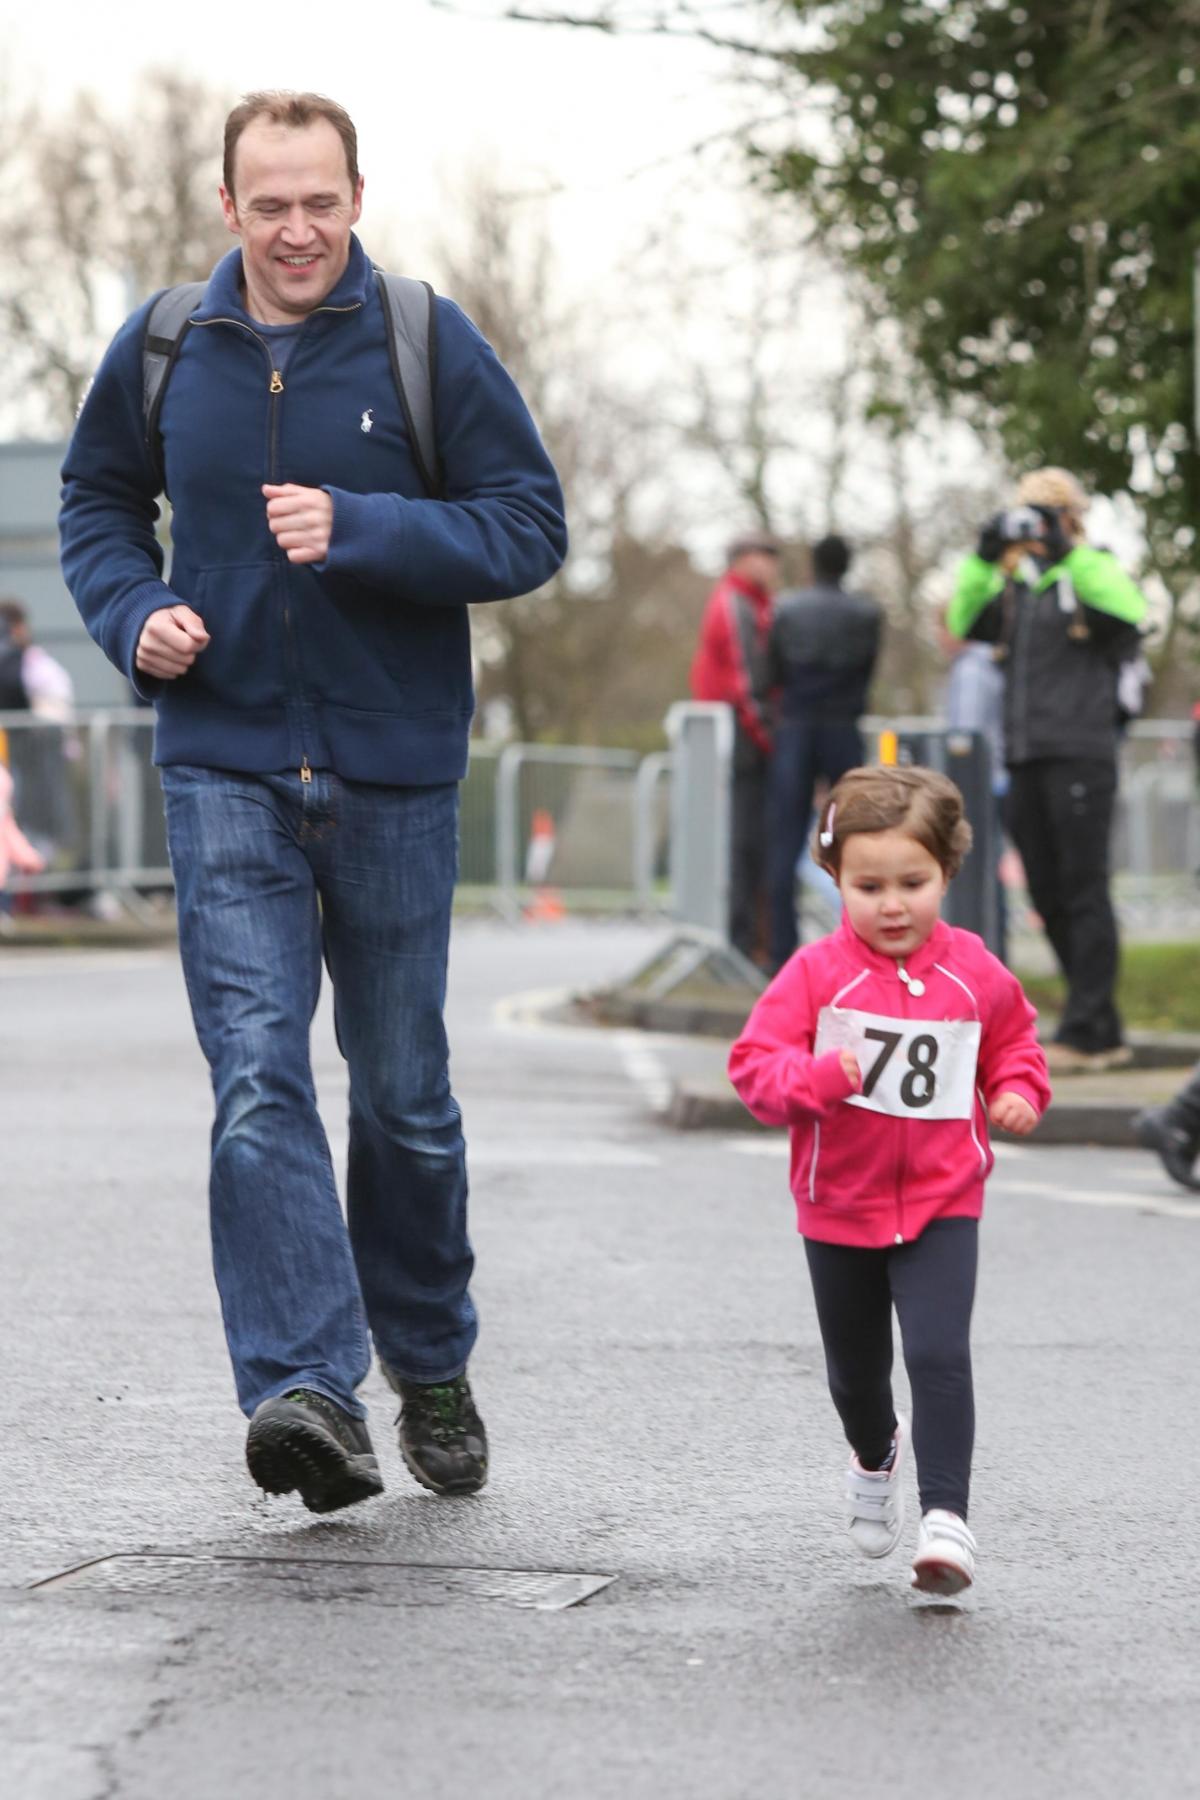 Picture from the Stubbington 10k road race